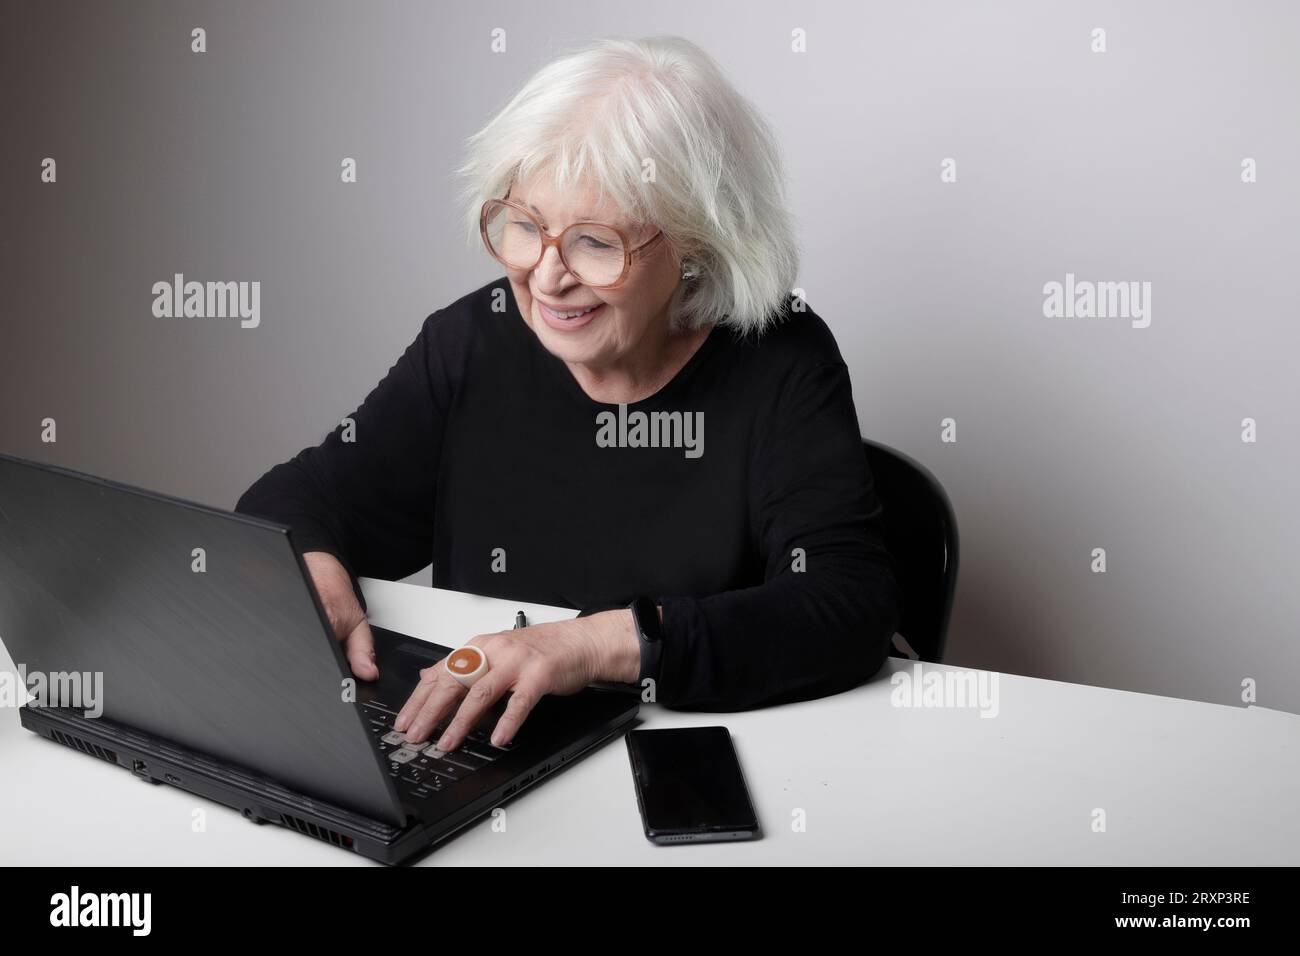 older woman using a laptop Stock Photo